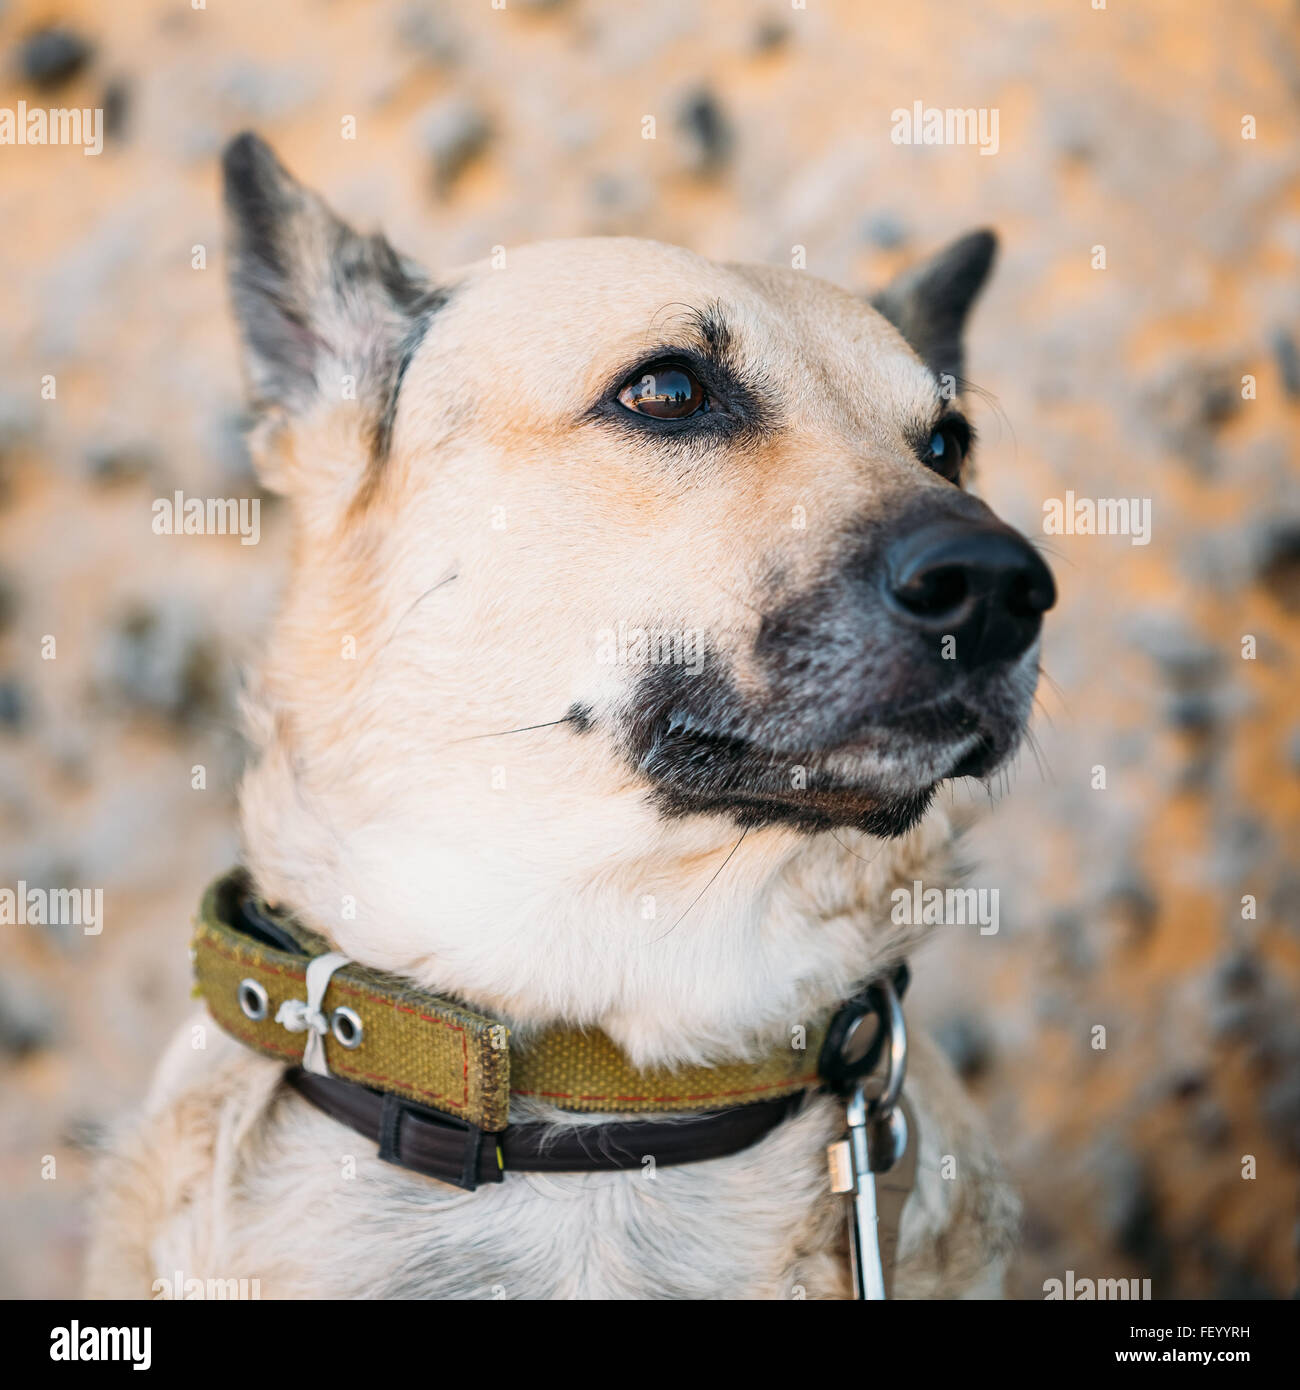 Funny Mixed Breed Dog marron, de taille moyenne, Close Up Banque D'Images